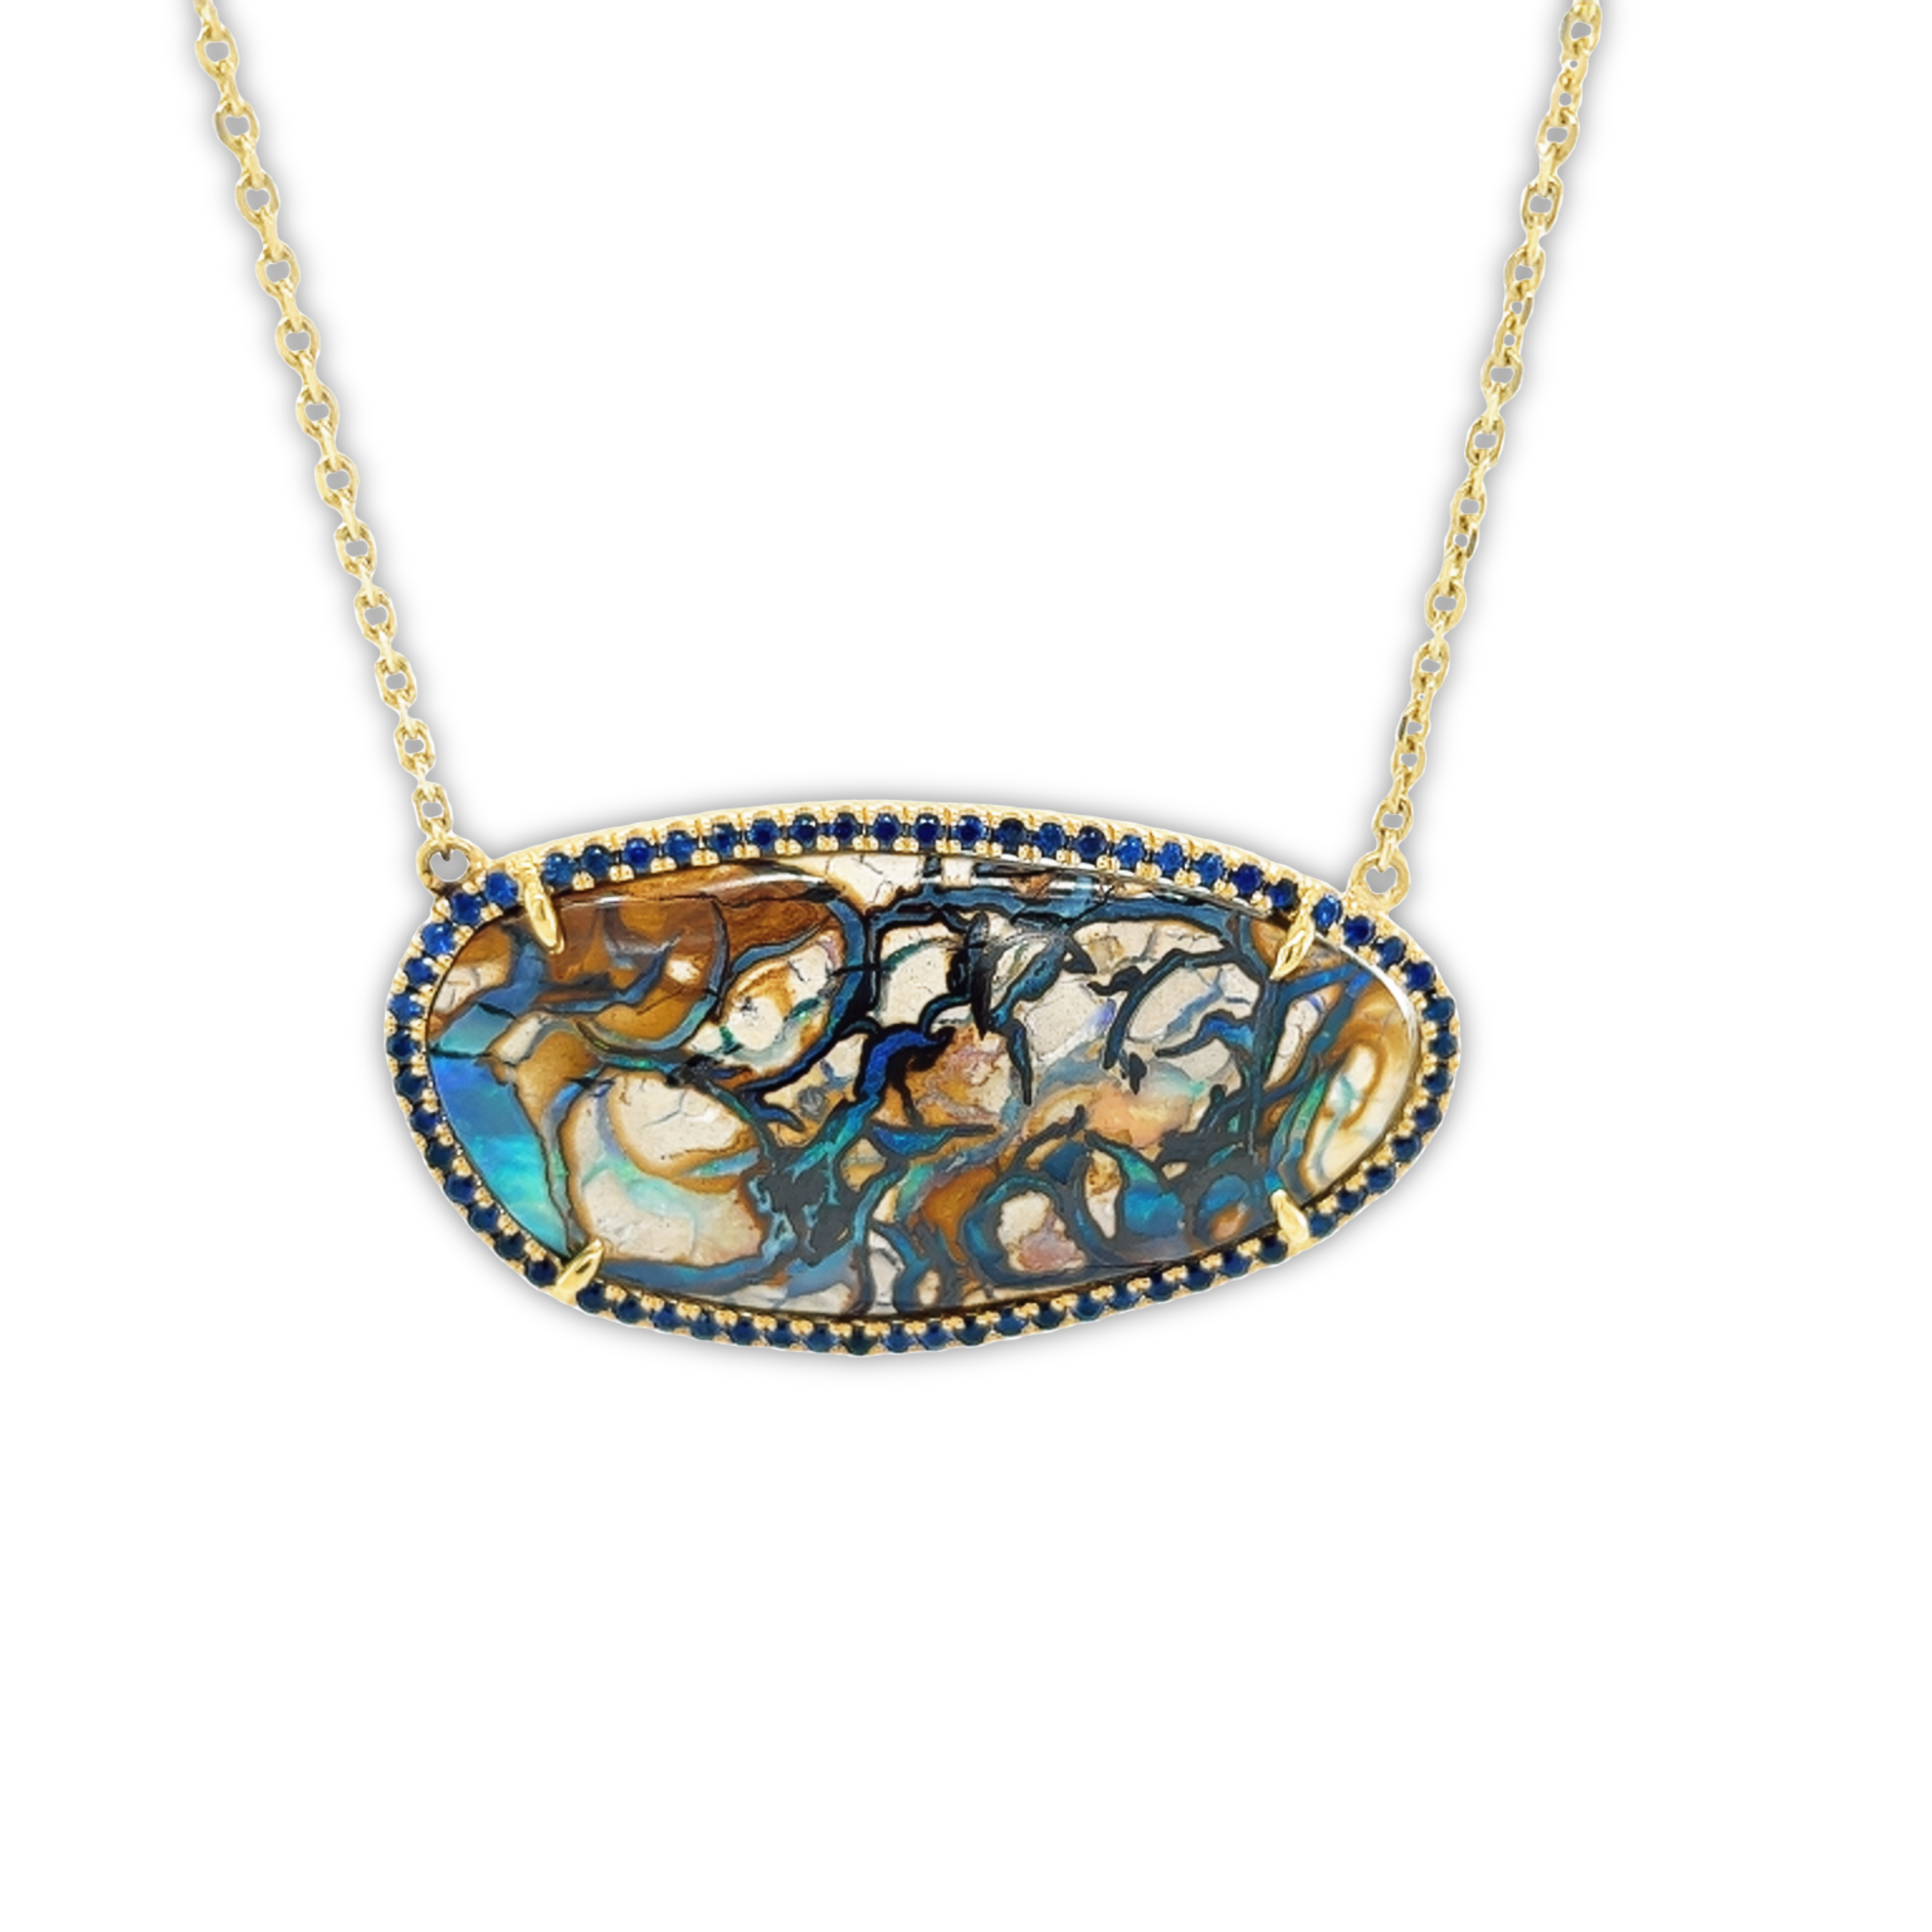 Featured image for “Two Sided Koroit Opal Necklace”